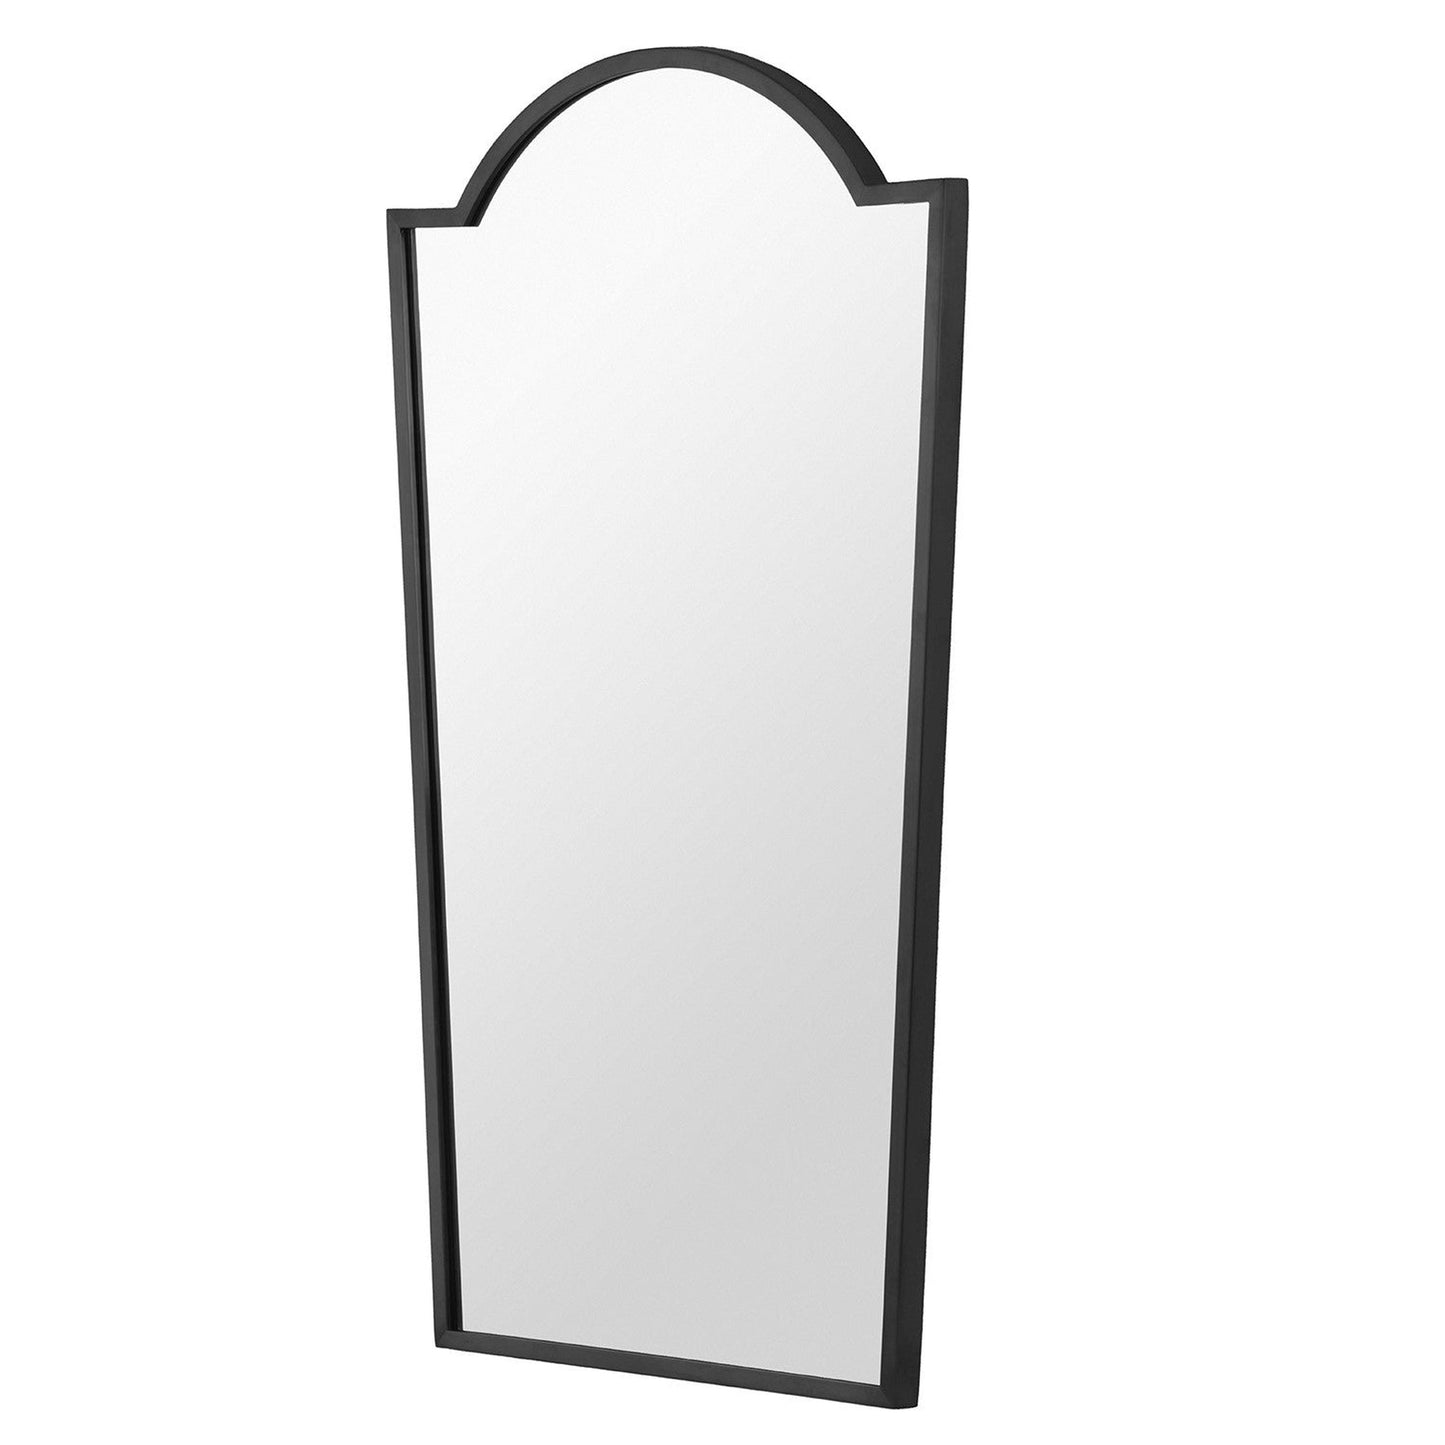 Mirror Home 22" x 40"Hand welded stainless steel mirror finished in black nickel.